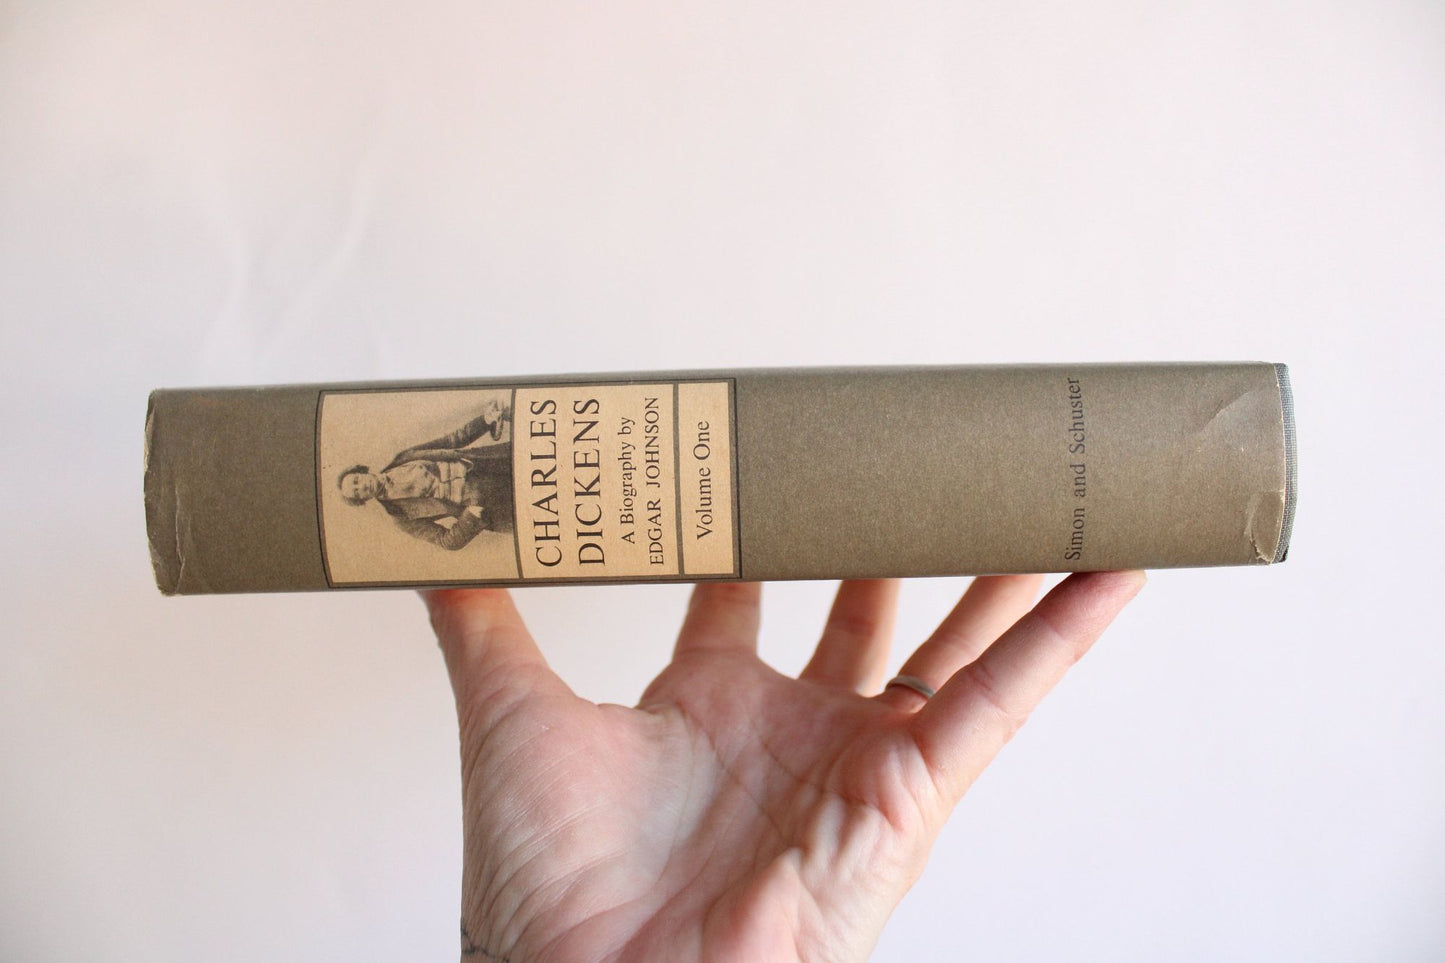 Vintage 1950s Book, "Charles Dickens" A Biography by Edgar Johnson